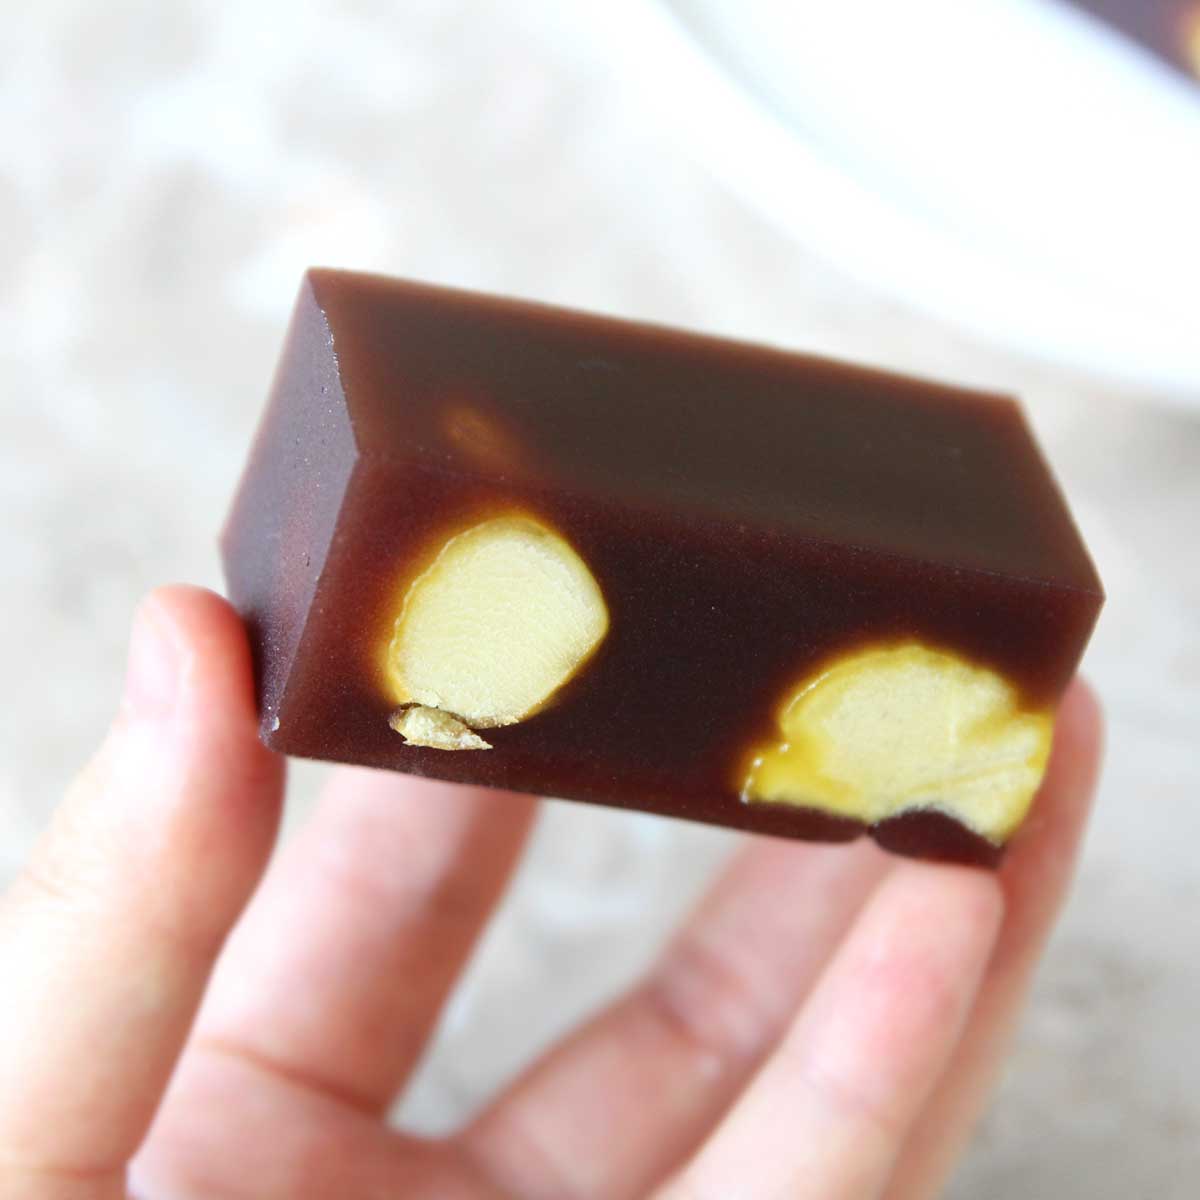 How to Make the Japanese Wagashi - Neri Yokan with Chestnuts - PB Fit Protein Bars